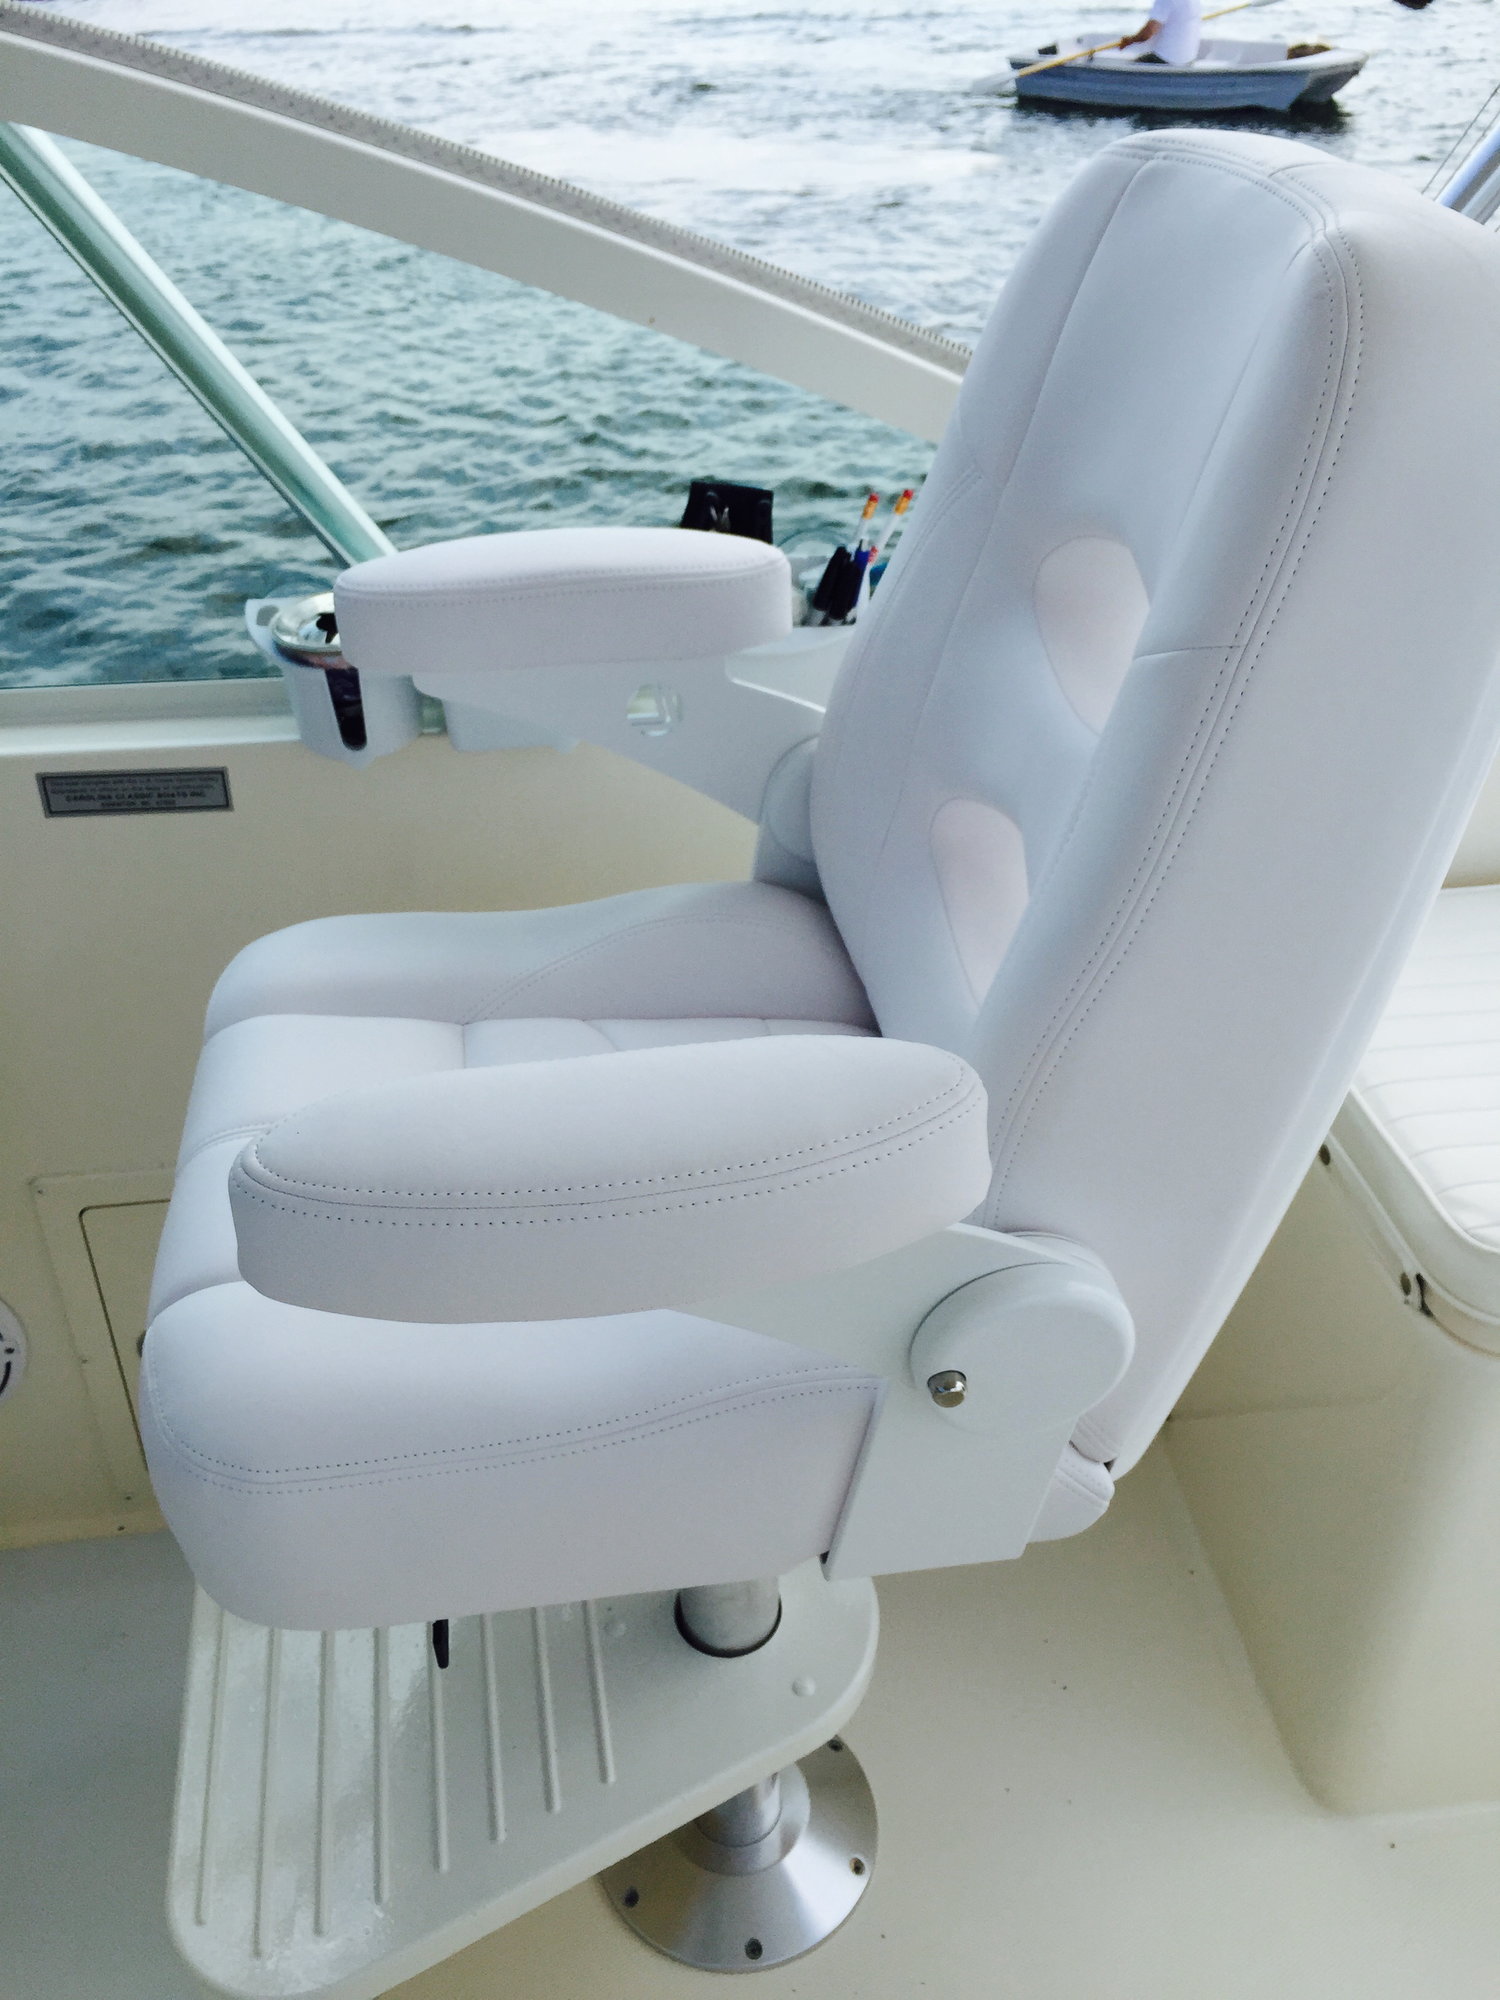 Boat seat without holes in boat (tin boat) - The Hull Truth - Boating and  Fishing Forum